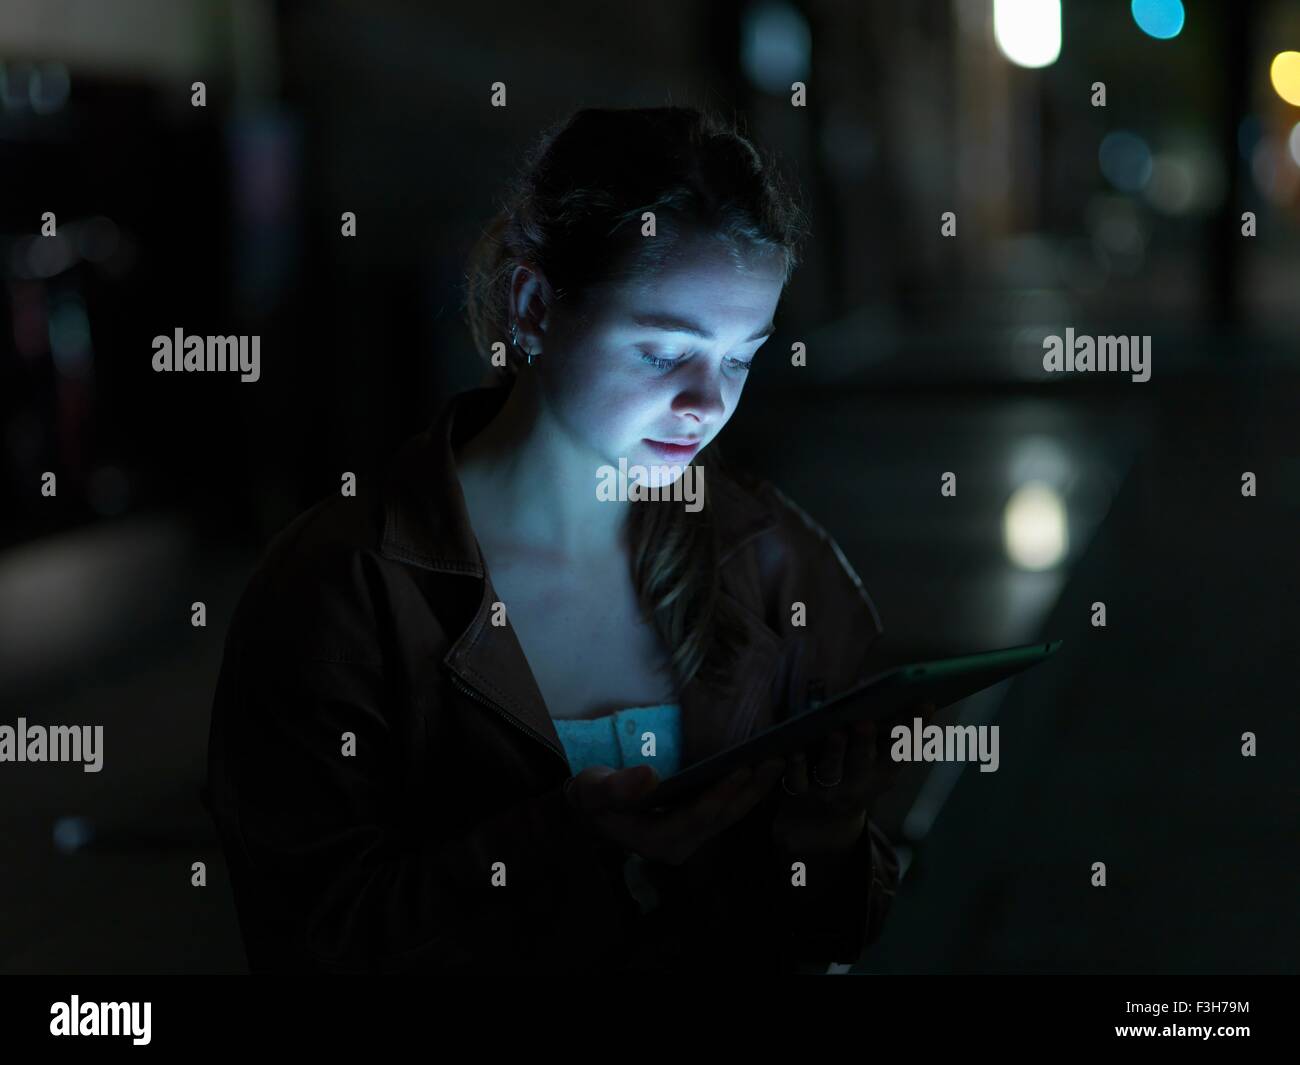 Young woman using digital tablet, outdoors, at night, face illuminated Stock Photo